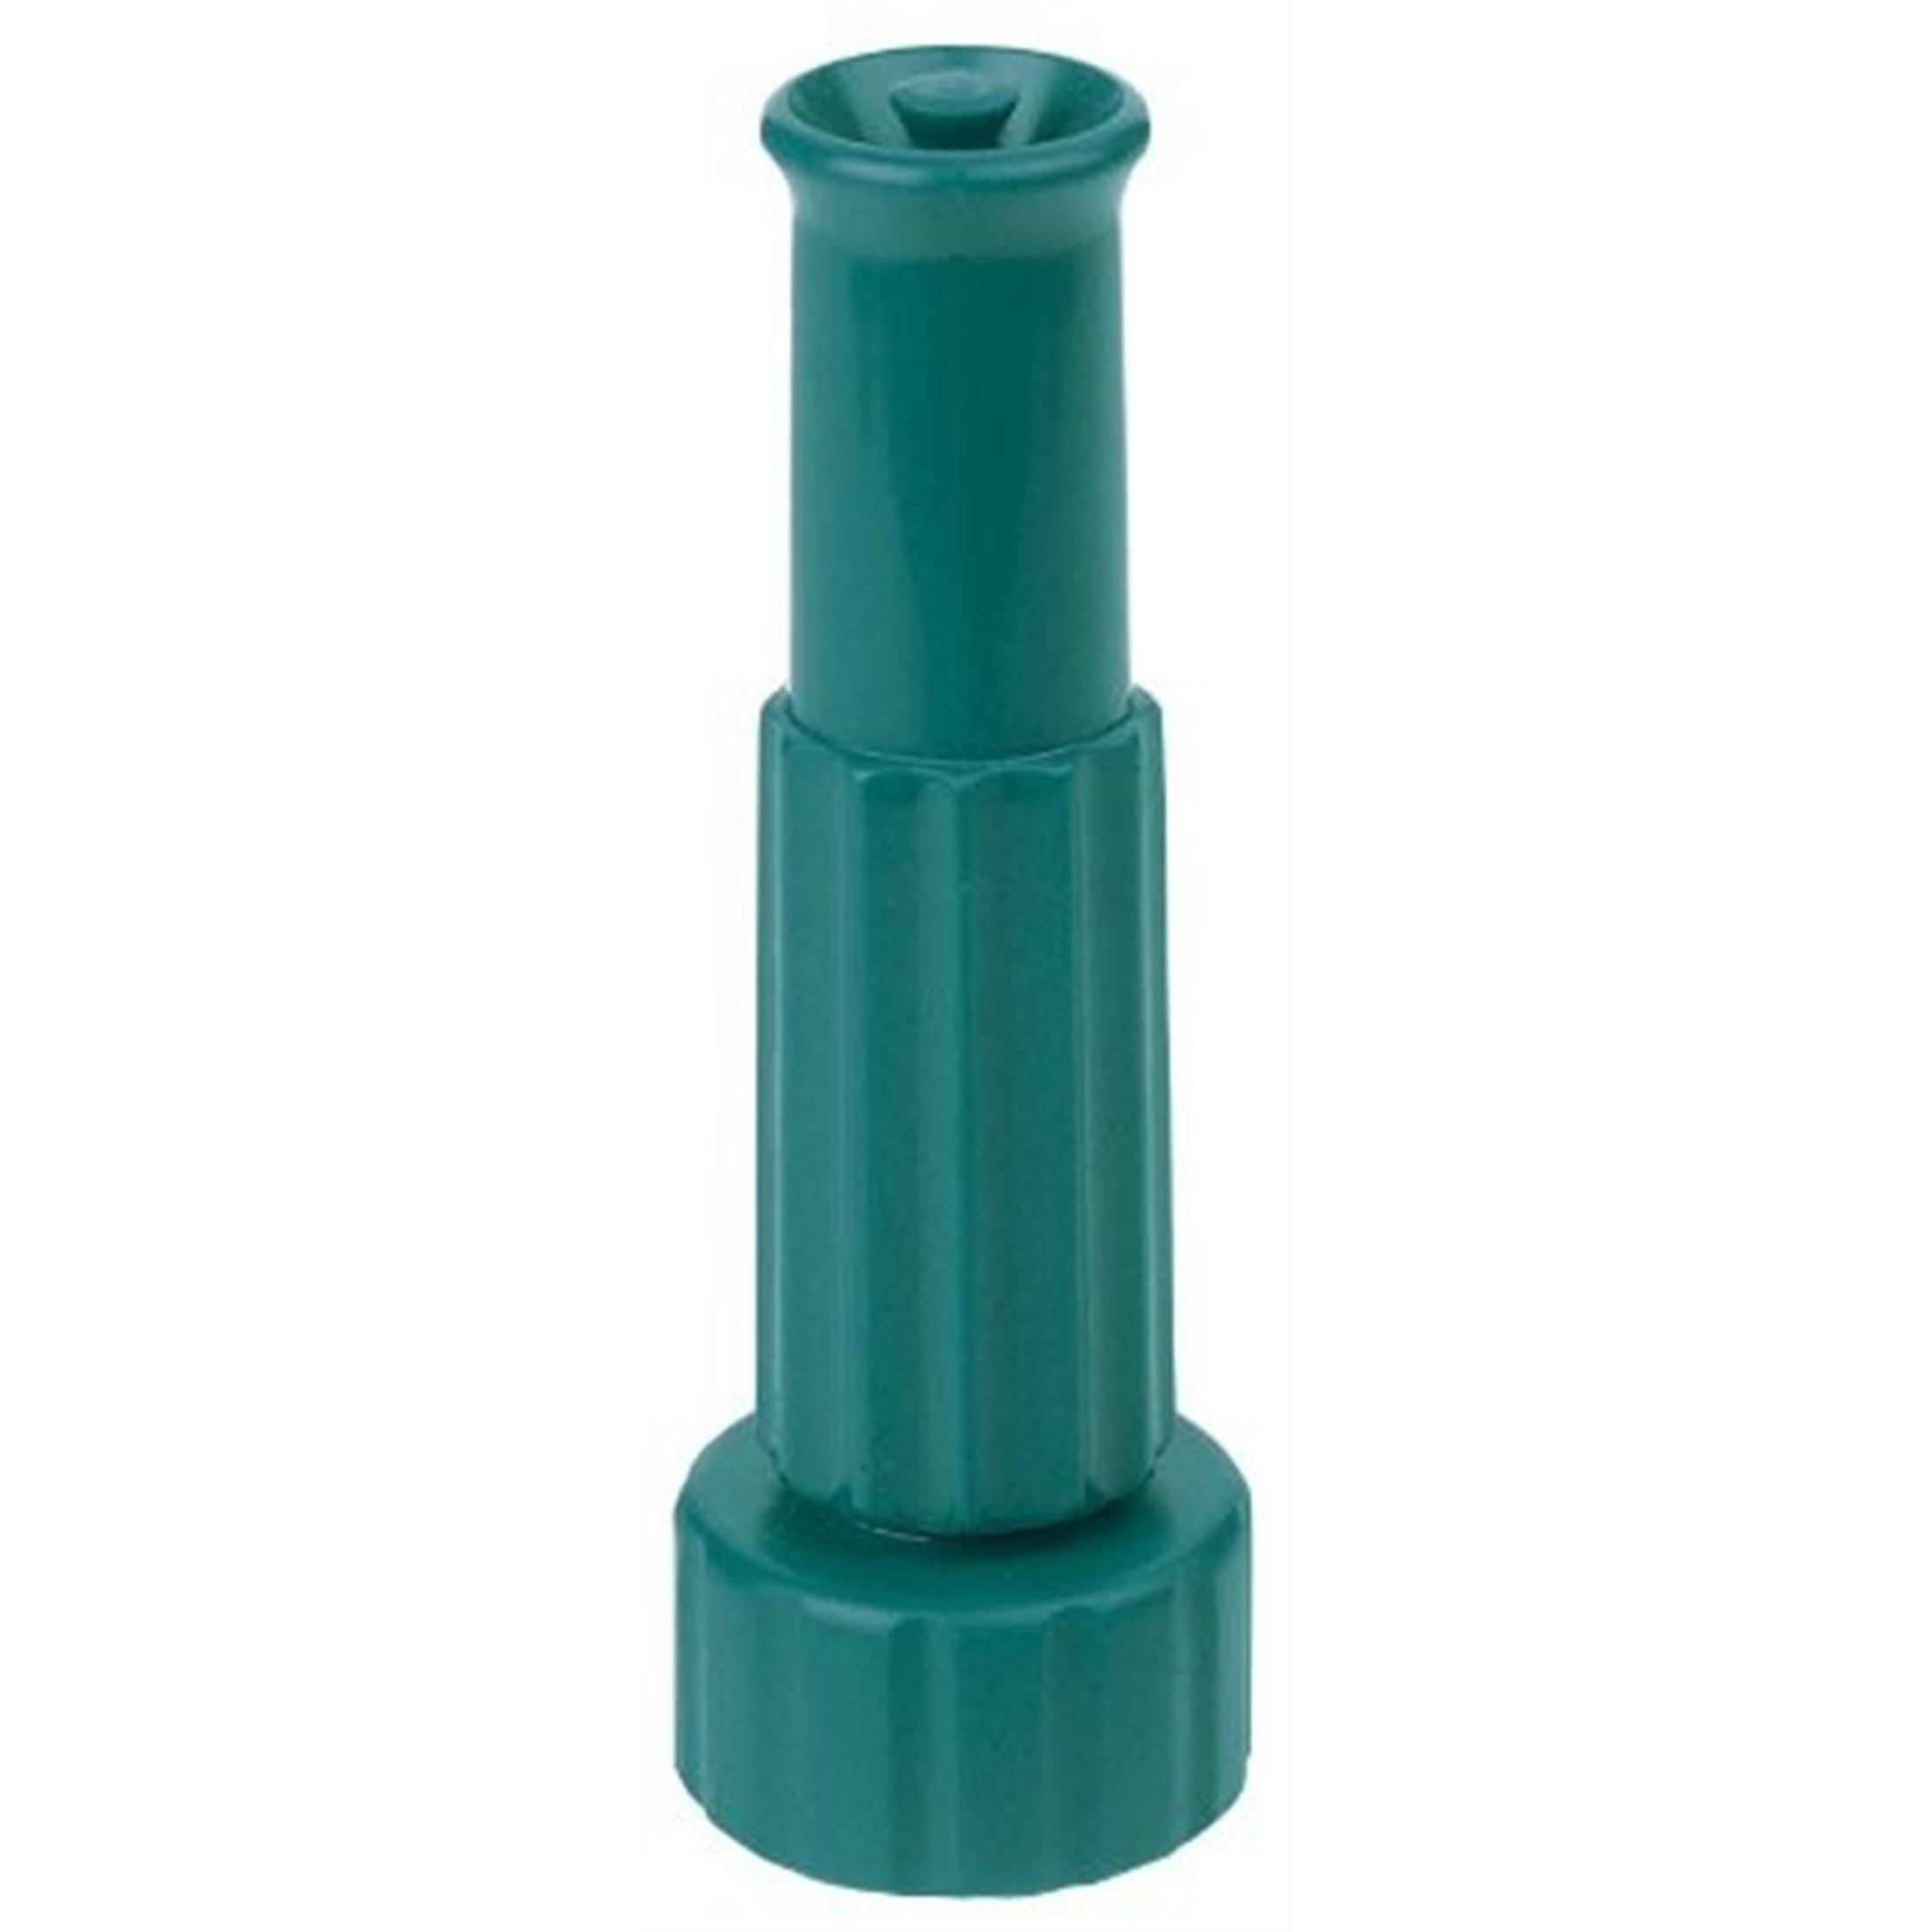 Gilmour Polymer Twist Water Hose Nozzle